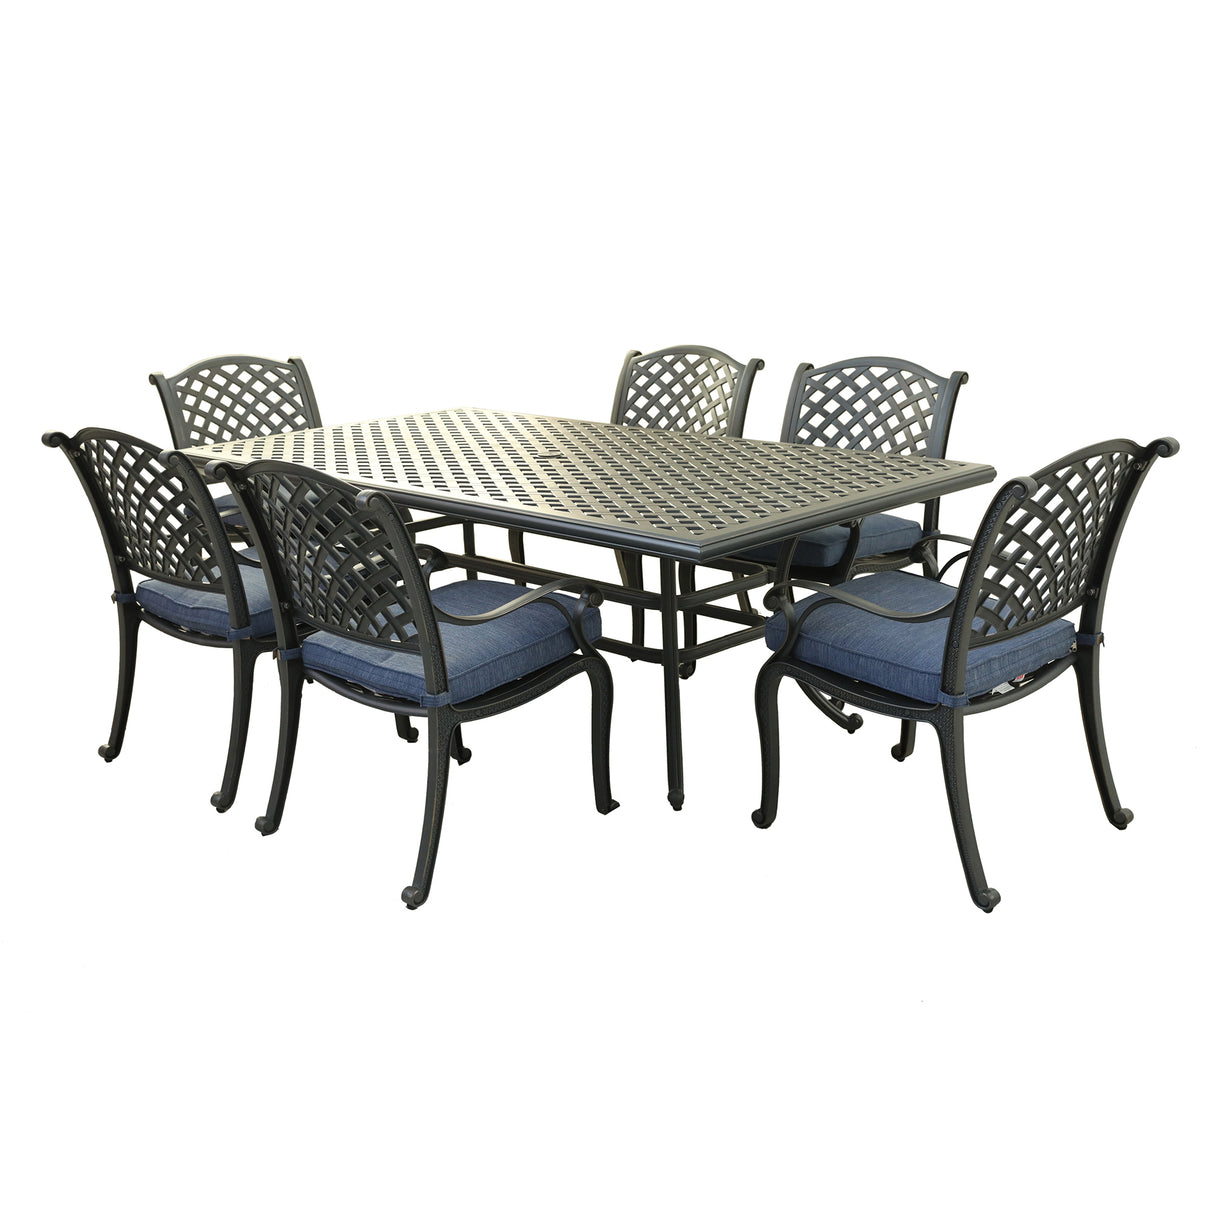 Rectangular 6 - Person 85.83" Long Aluminum Dining Set with Cushions, Navy Blue